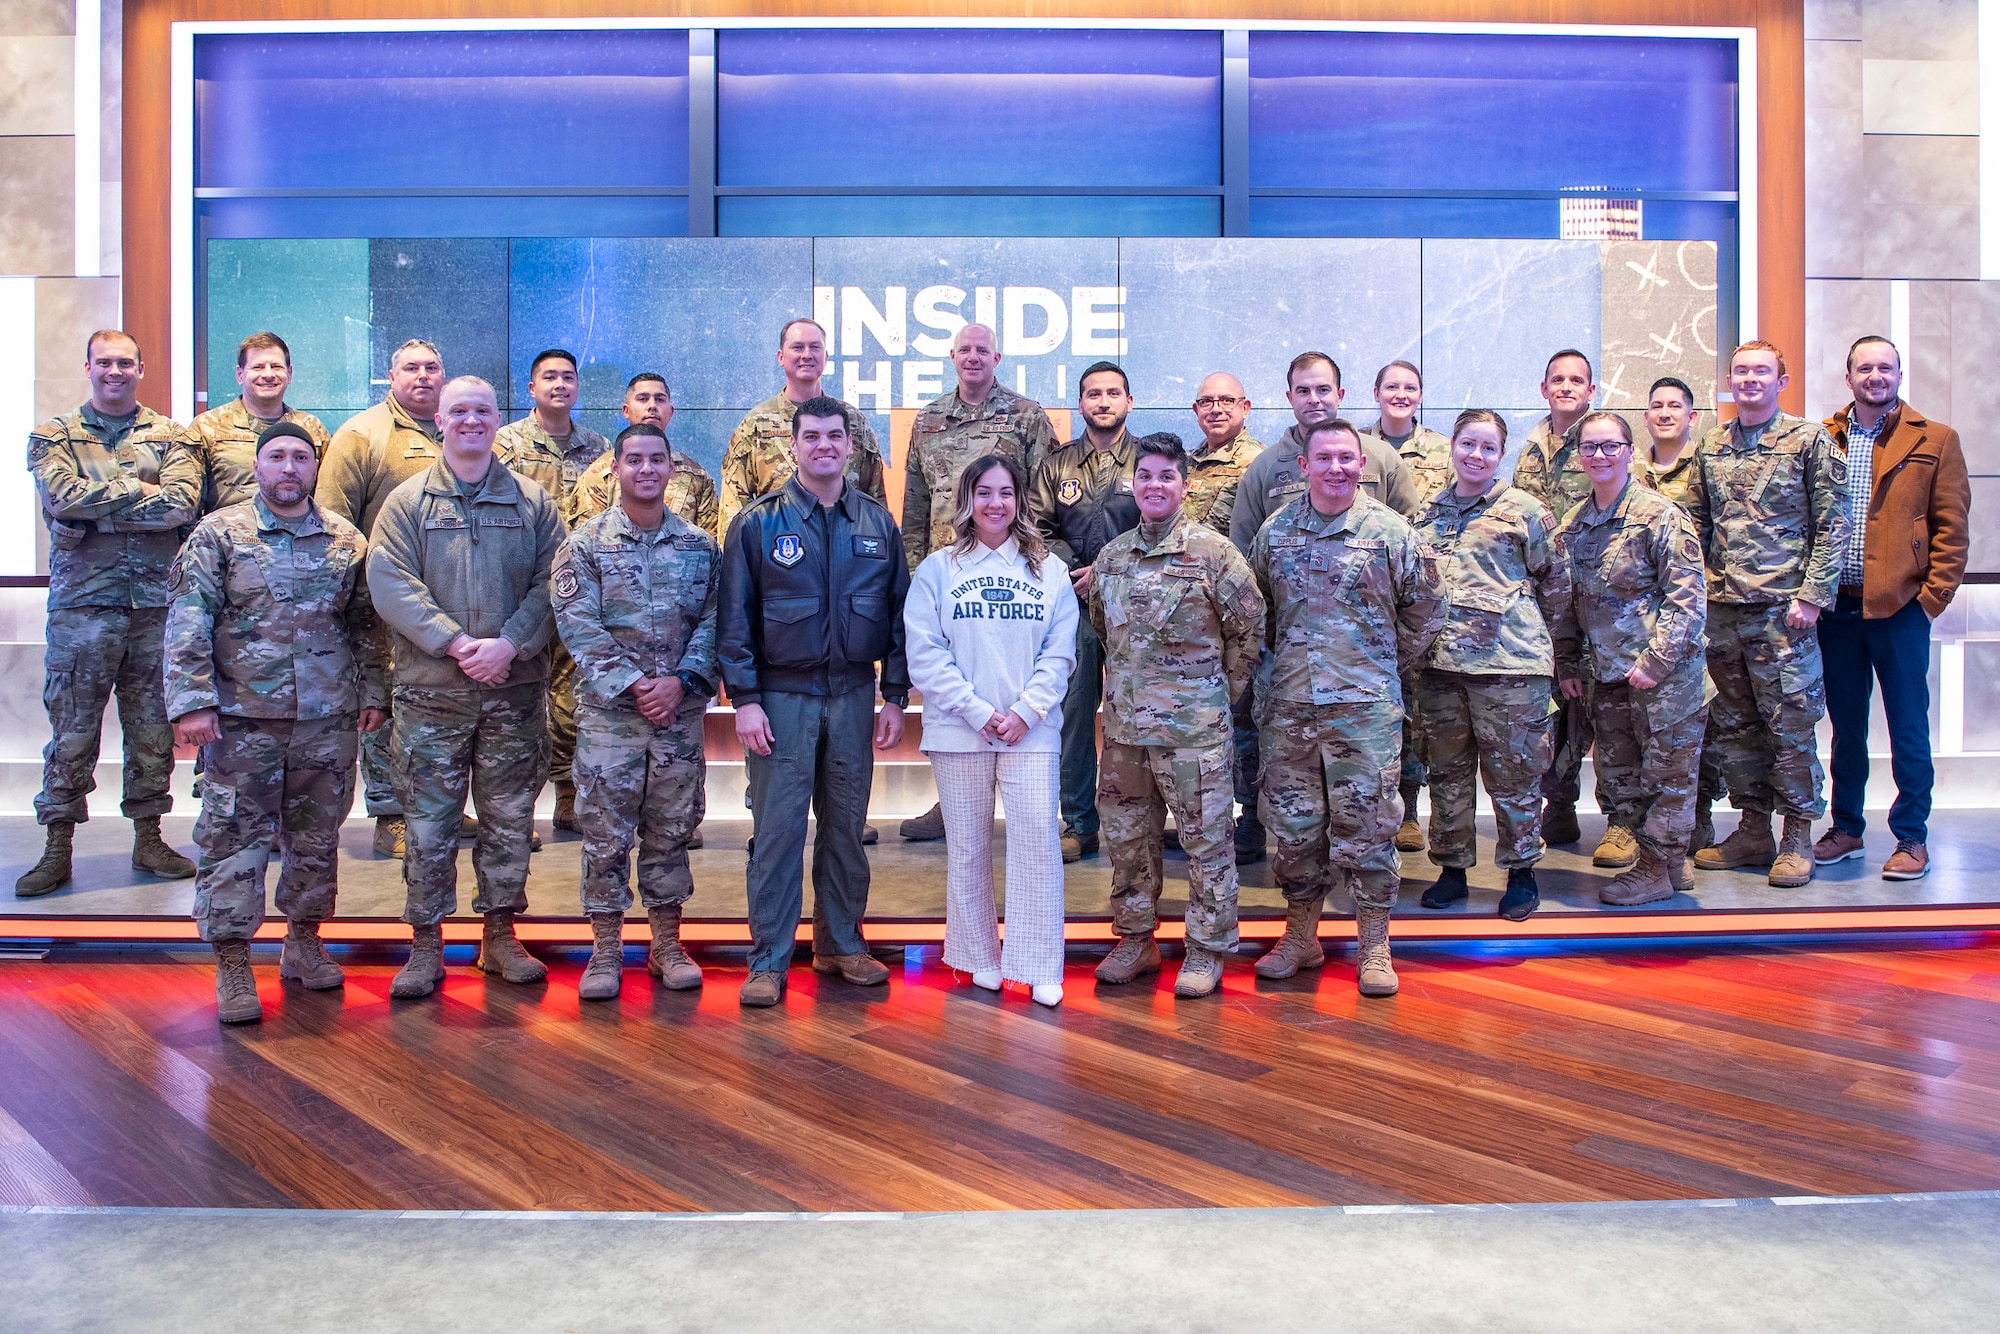 Airmen from the 514th Air Mobility Wing and the 108th Wing, Joint Base McGuire-Dix-Lakehurst, N.J. were invited to tour the facility by NFL Film's Community Teammates in honor of Veterans Day.